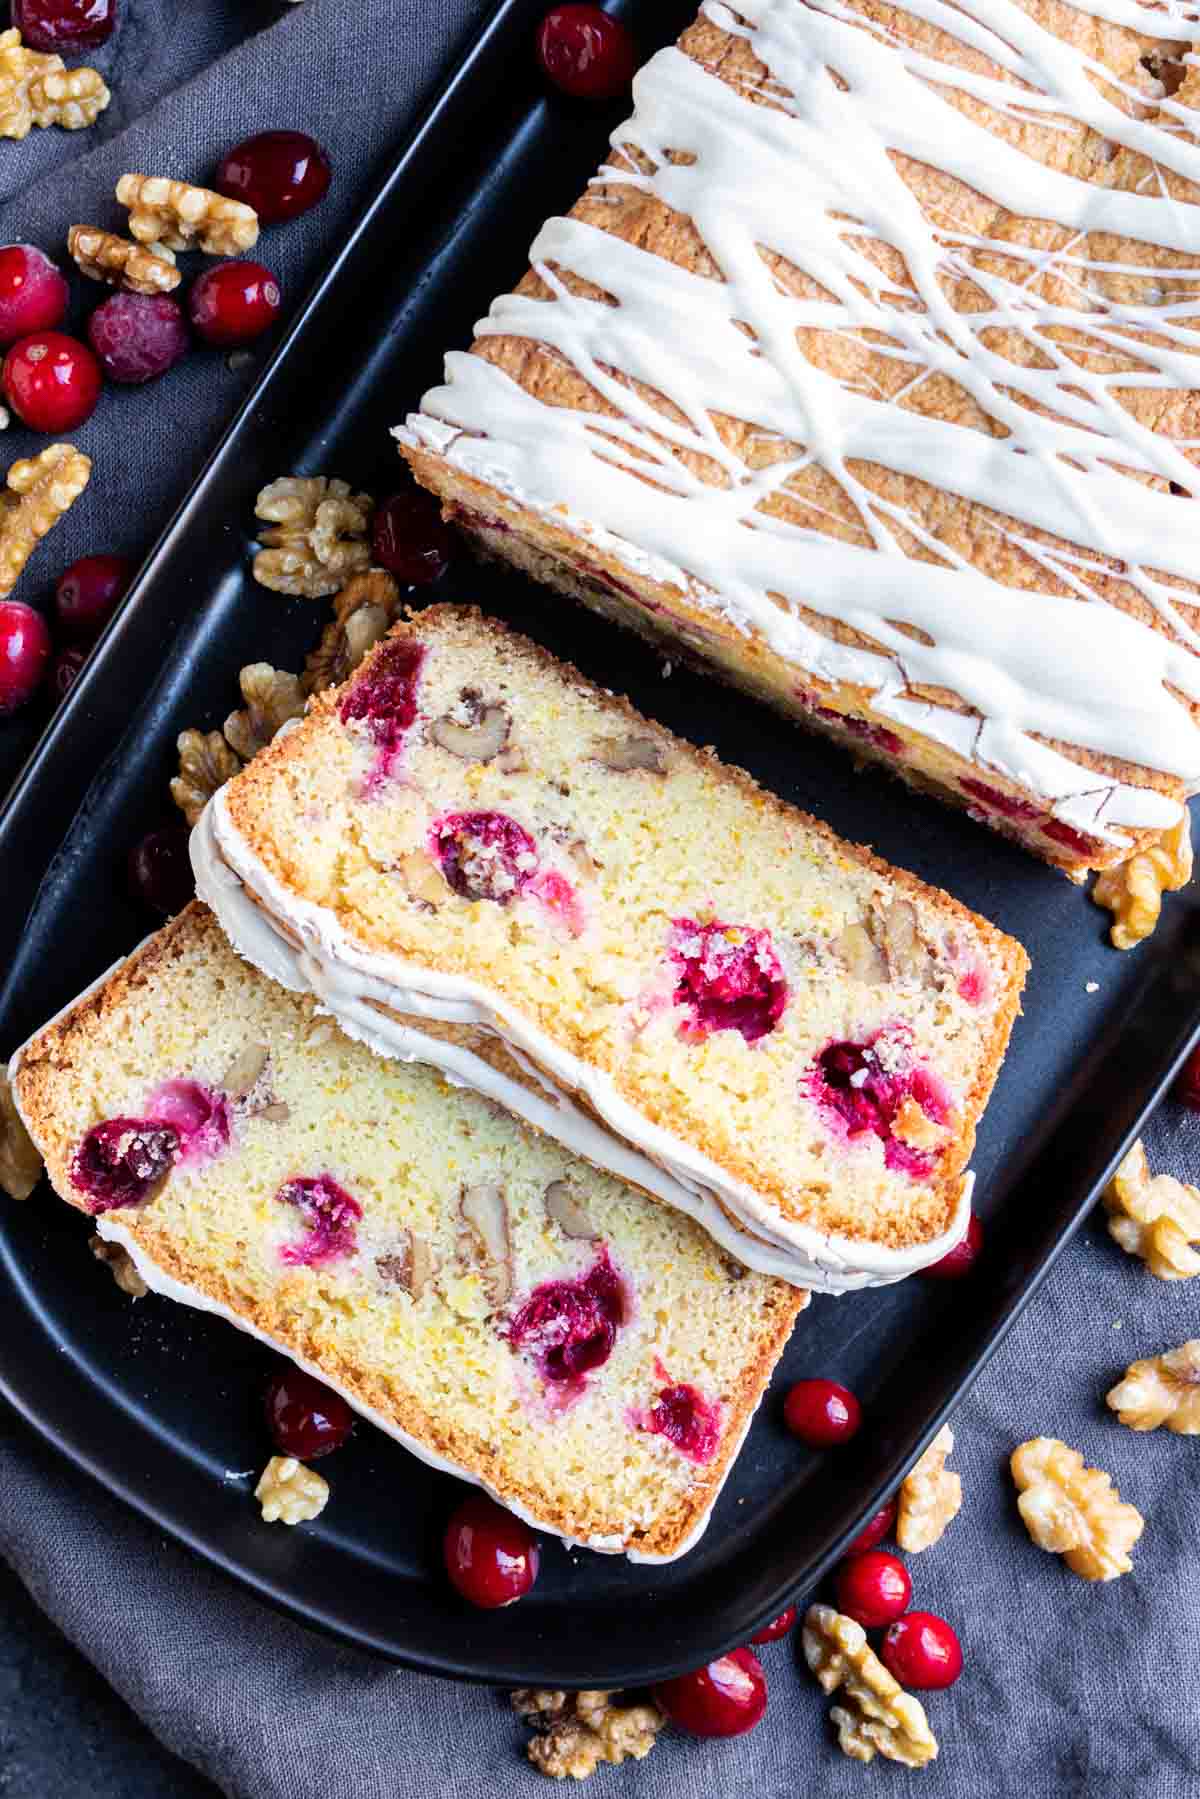 Cranberry Orange Bread on black platter with nuts and cranberries